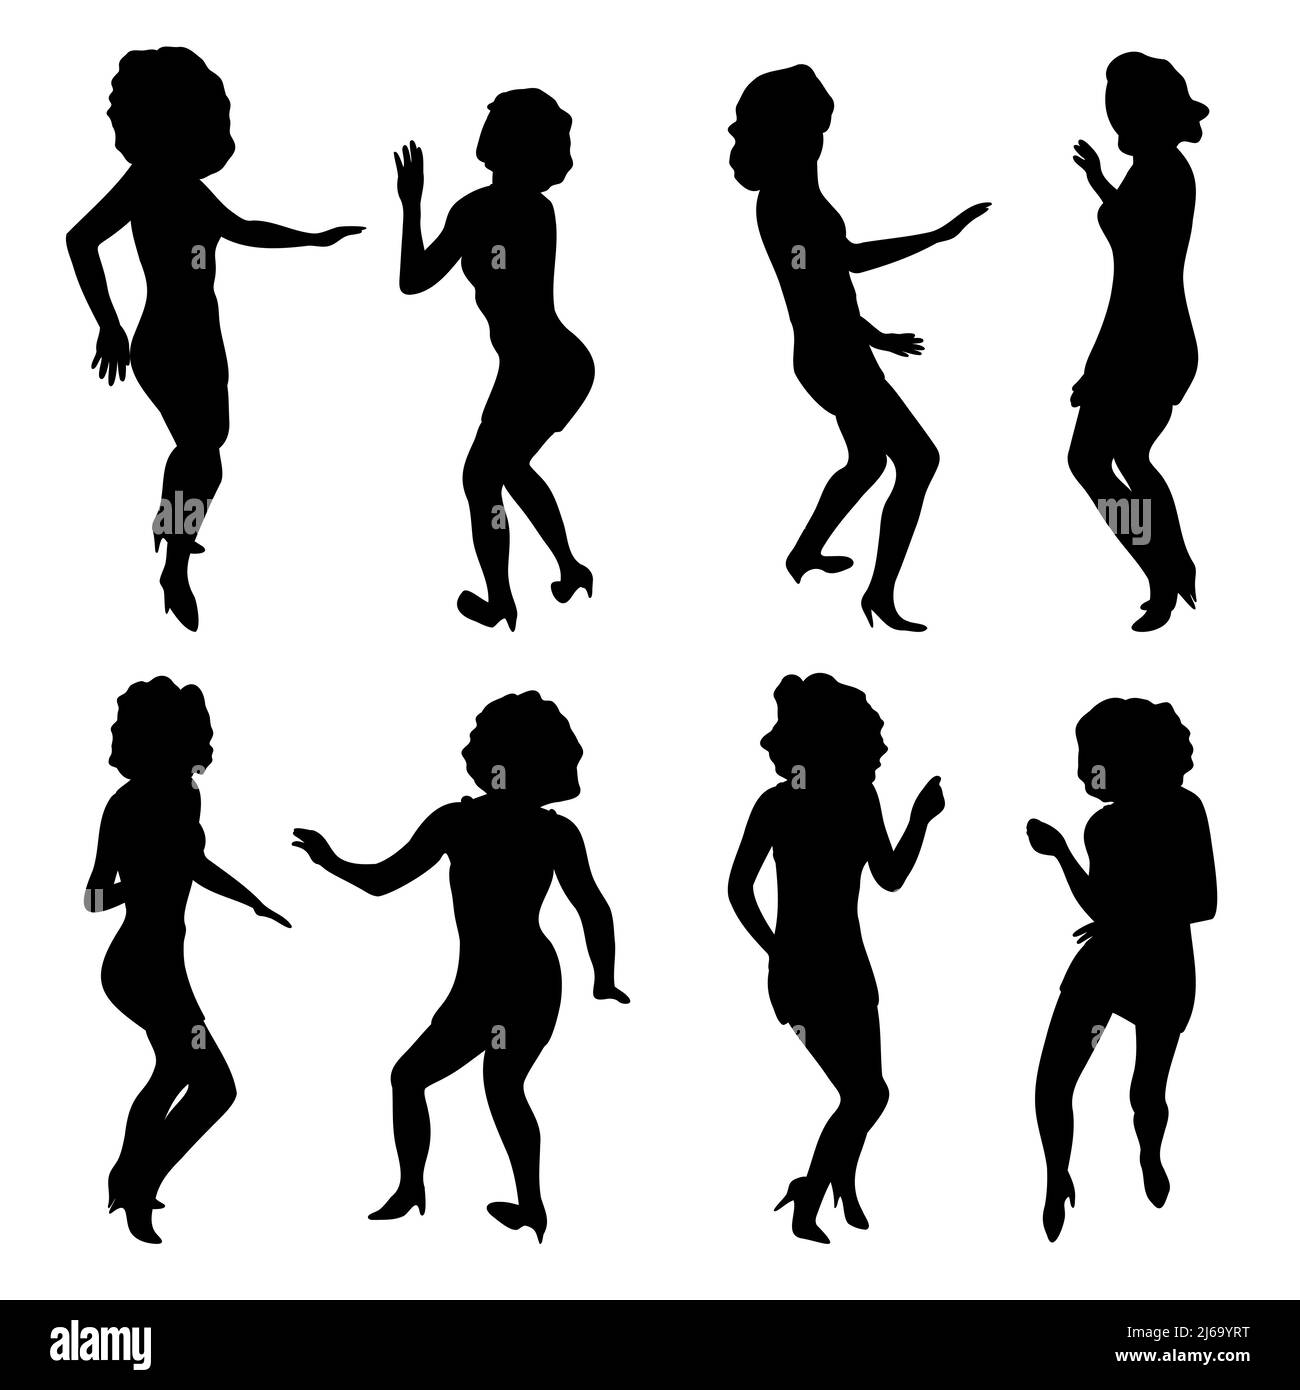 Women in skinny dress dancing black silhouettes. Set of moving disco curly girl shapes. Party abstract poses. Vector illustration for flyer, poster, card, holiday concept. Stock Vector